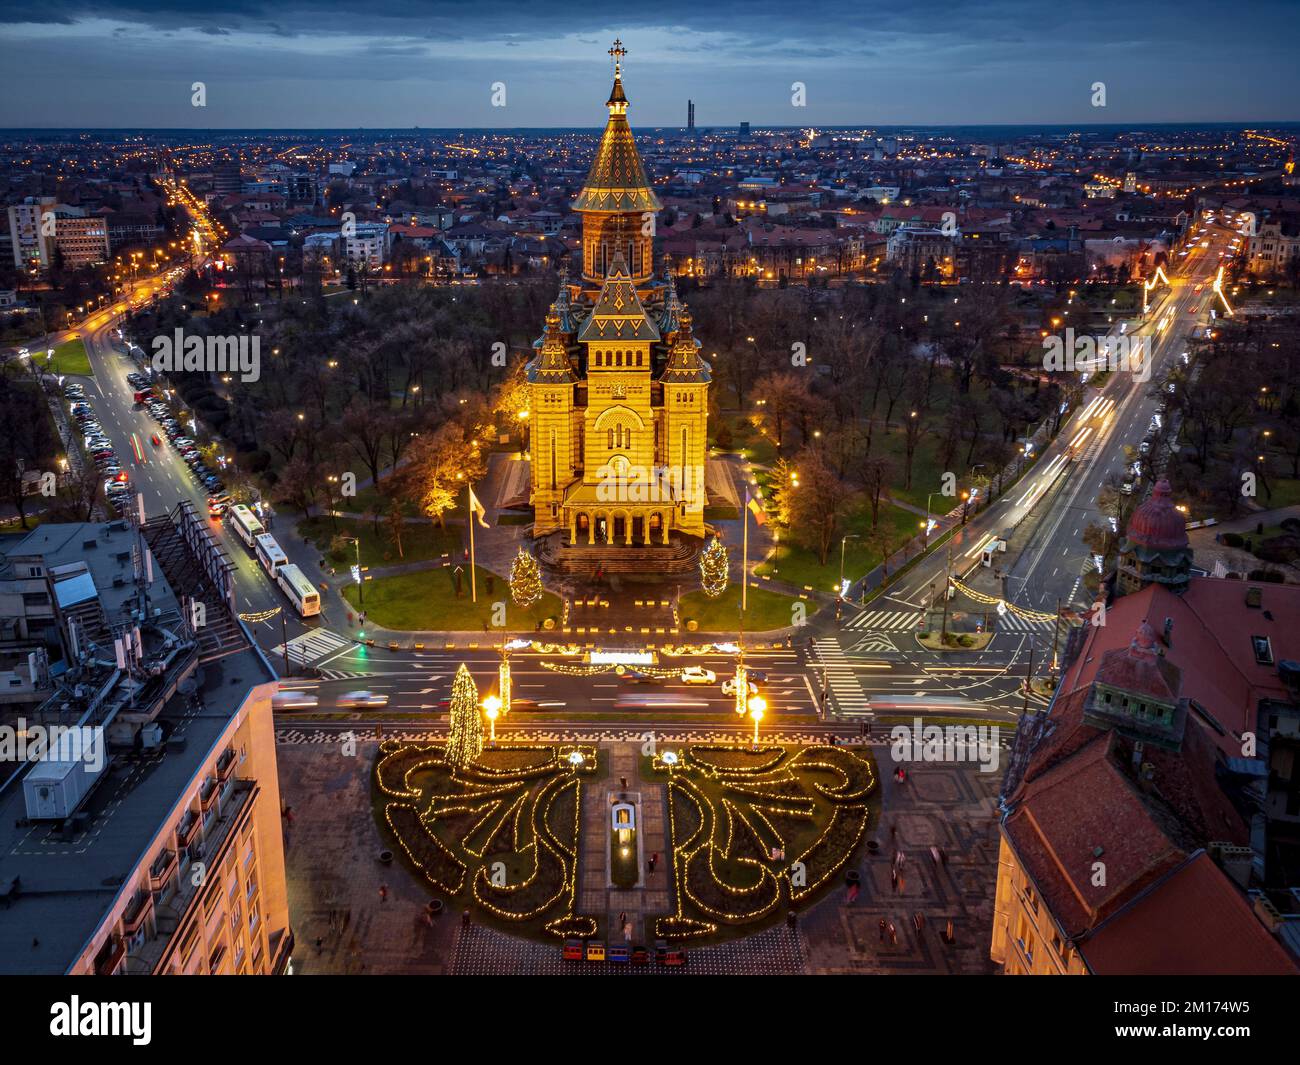 Aerial view of Timisoara’s lights and decorations for the Christmas Market. Photo taken on 10th of December 2022 in Timisoara, Timis county, Romania. Stock Photo